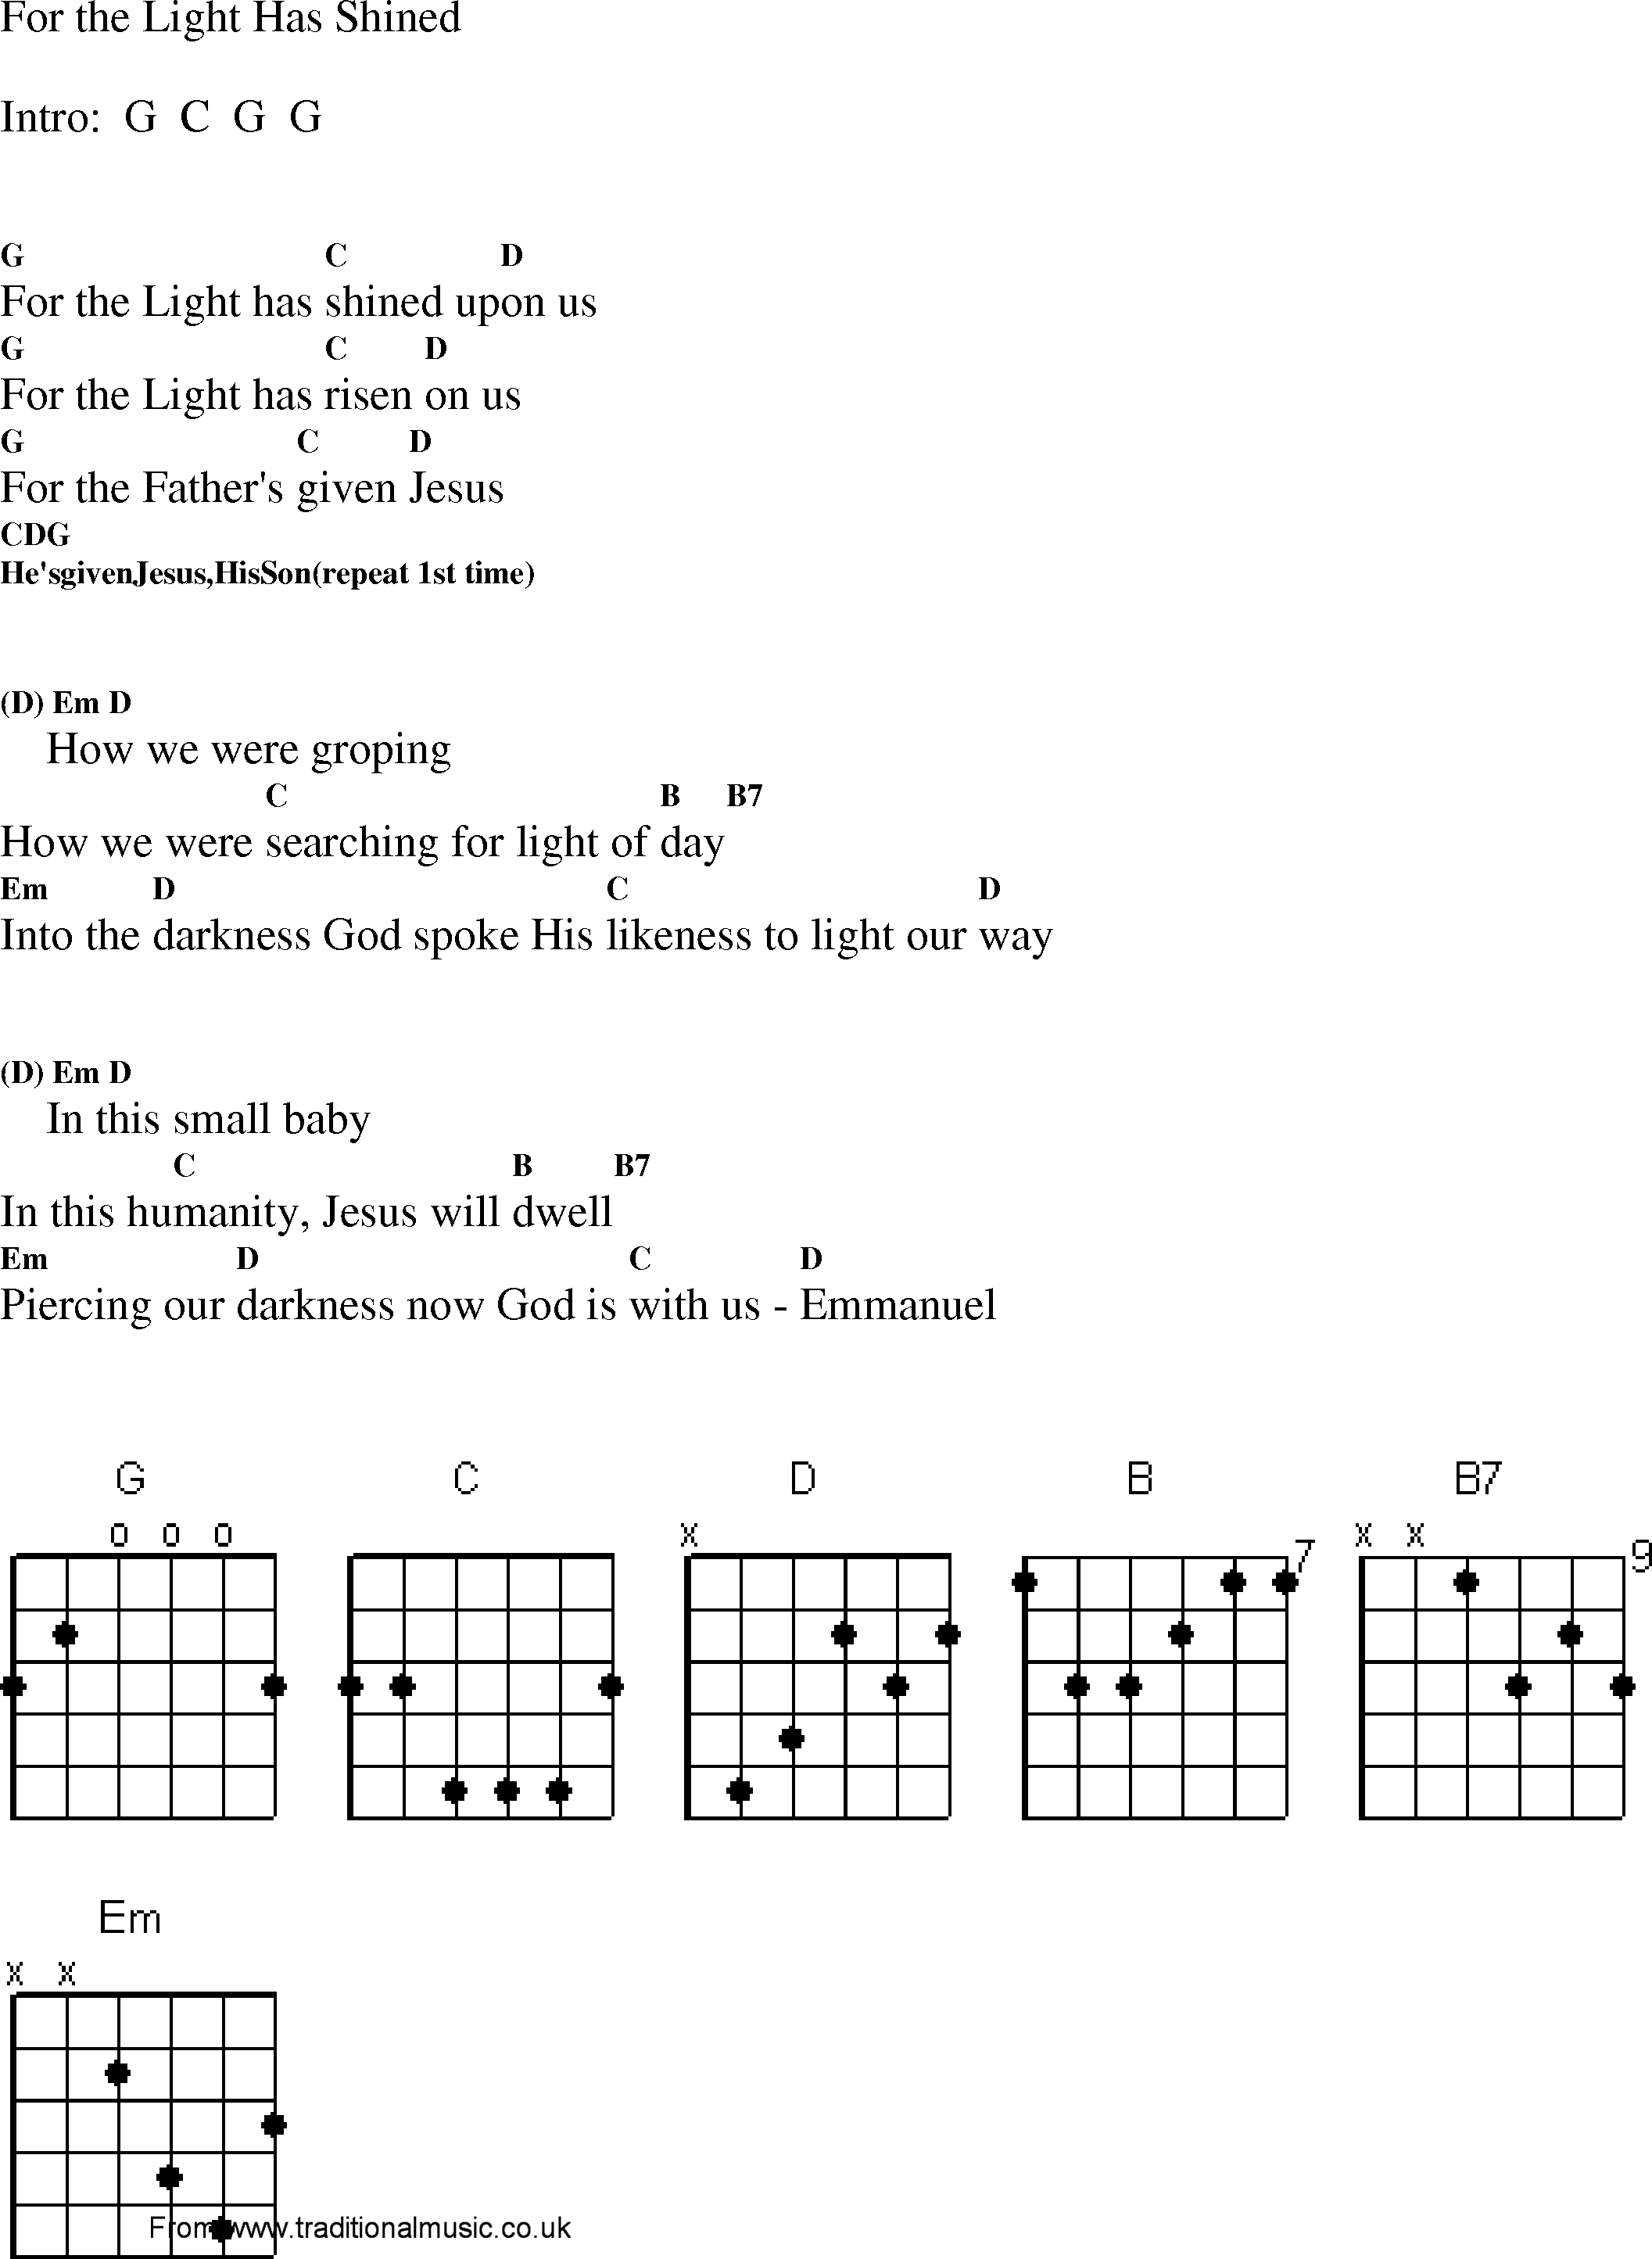 Gospel Song: for_the_light_has_shined, lyrics and chords.